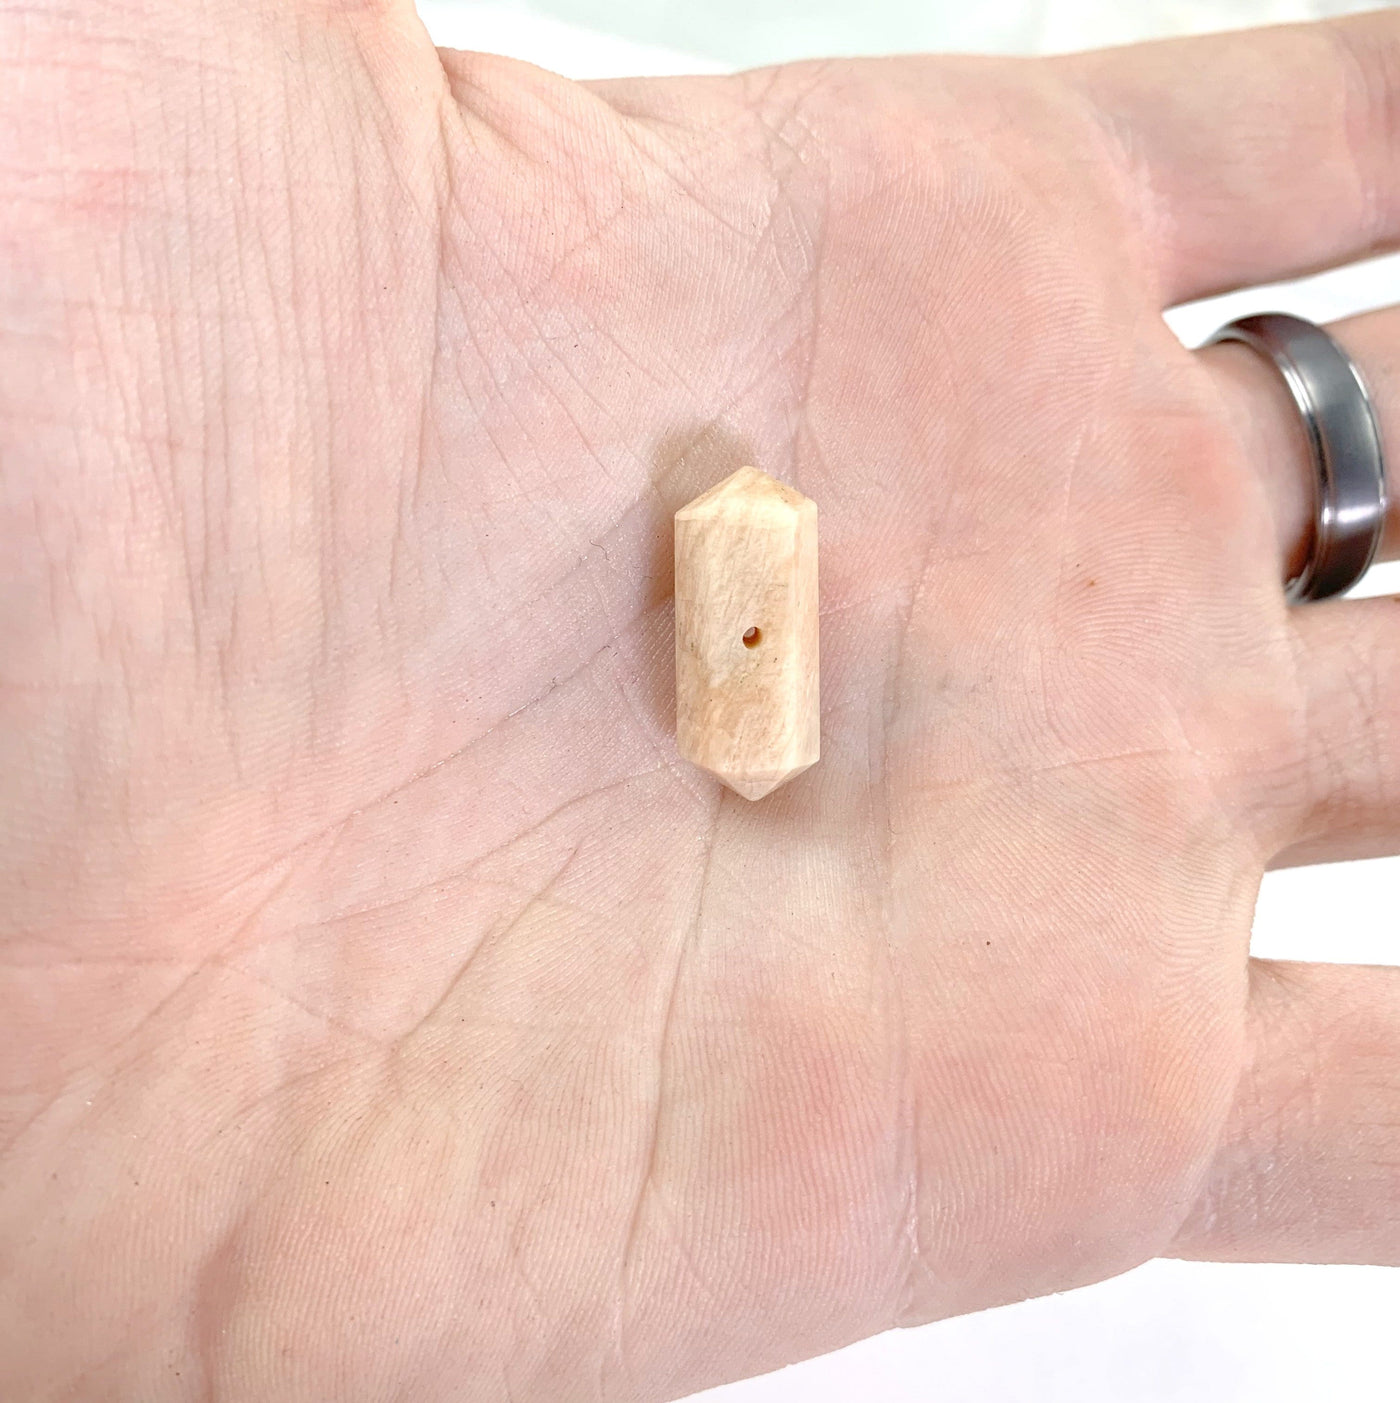 Sunstone Pencil Point in the palm of a hand